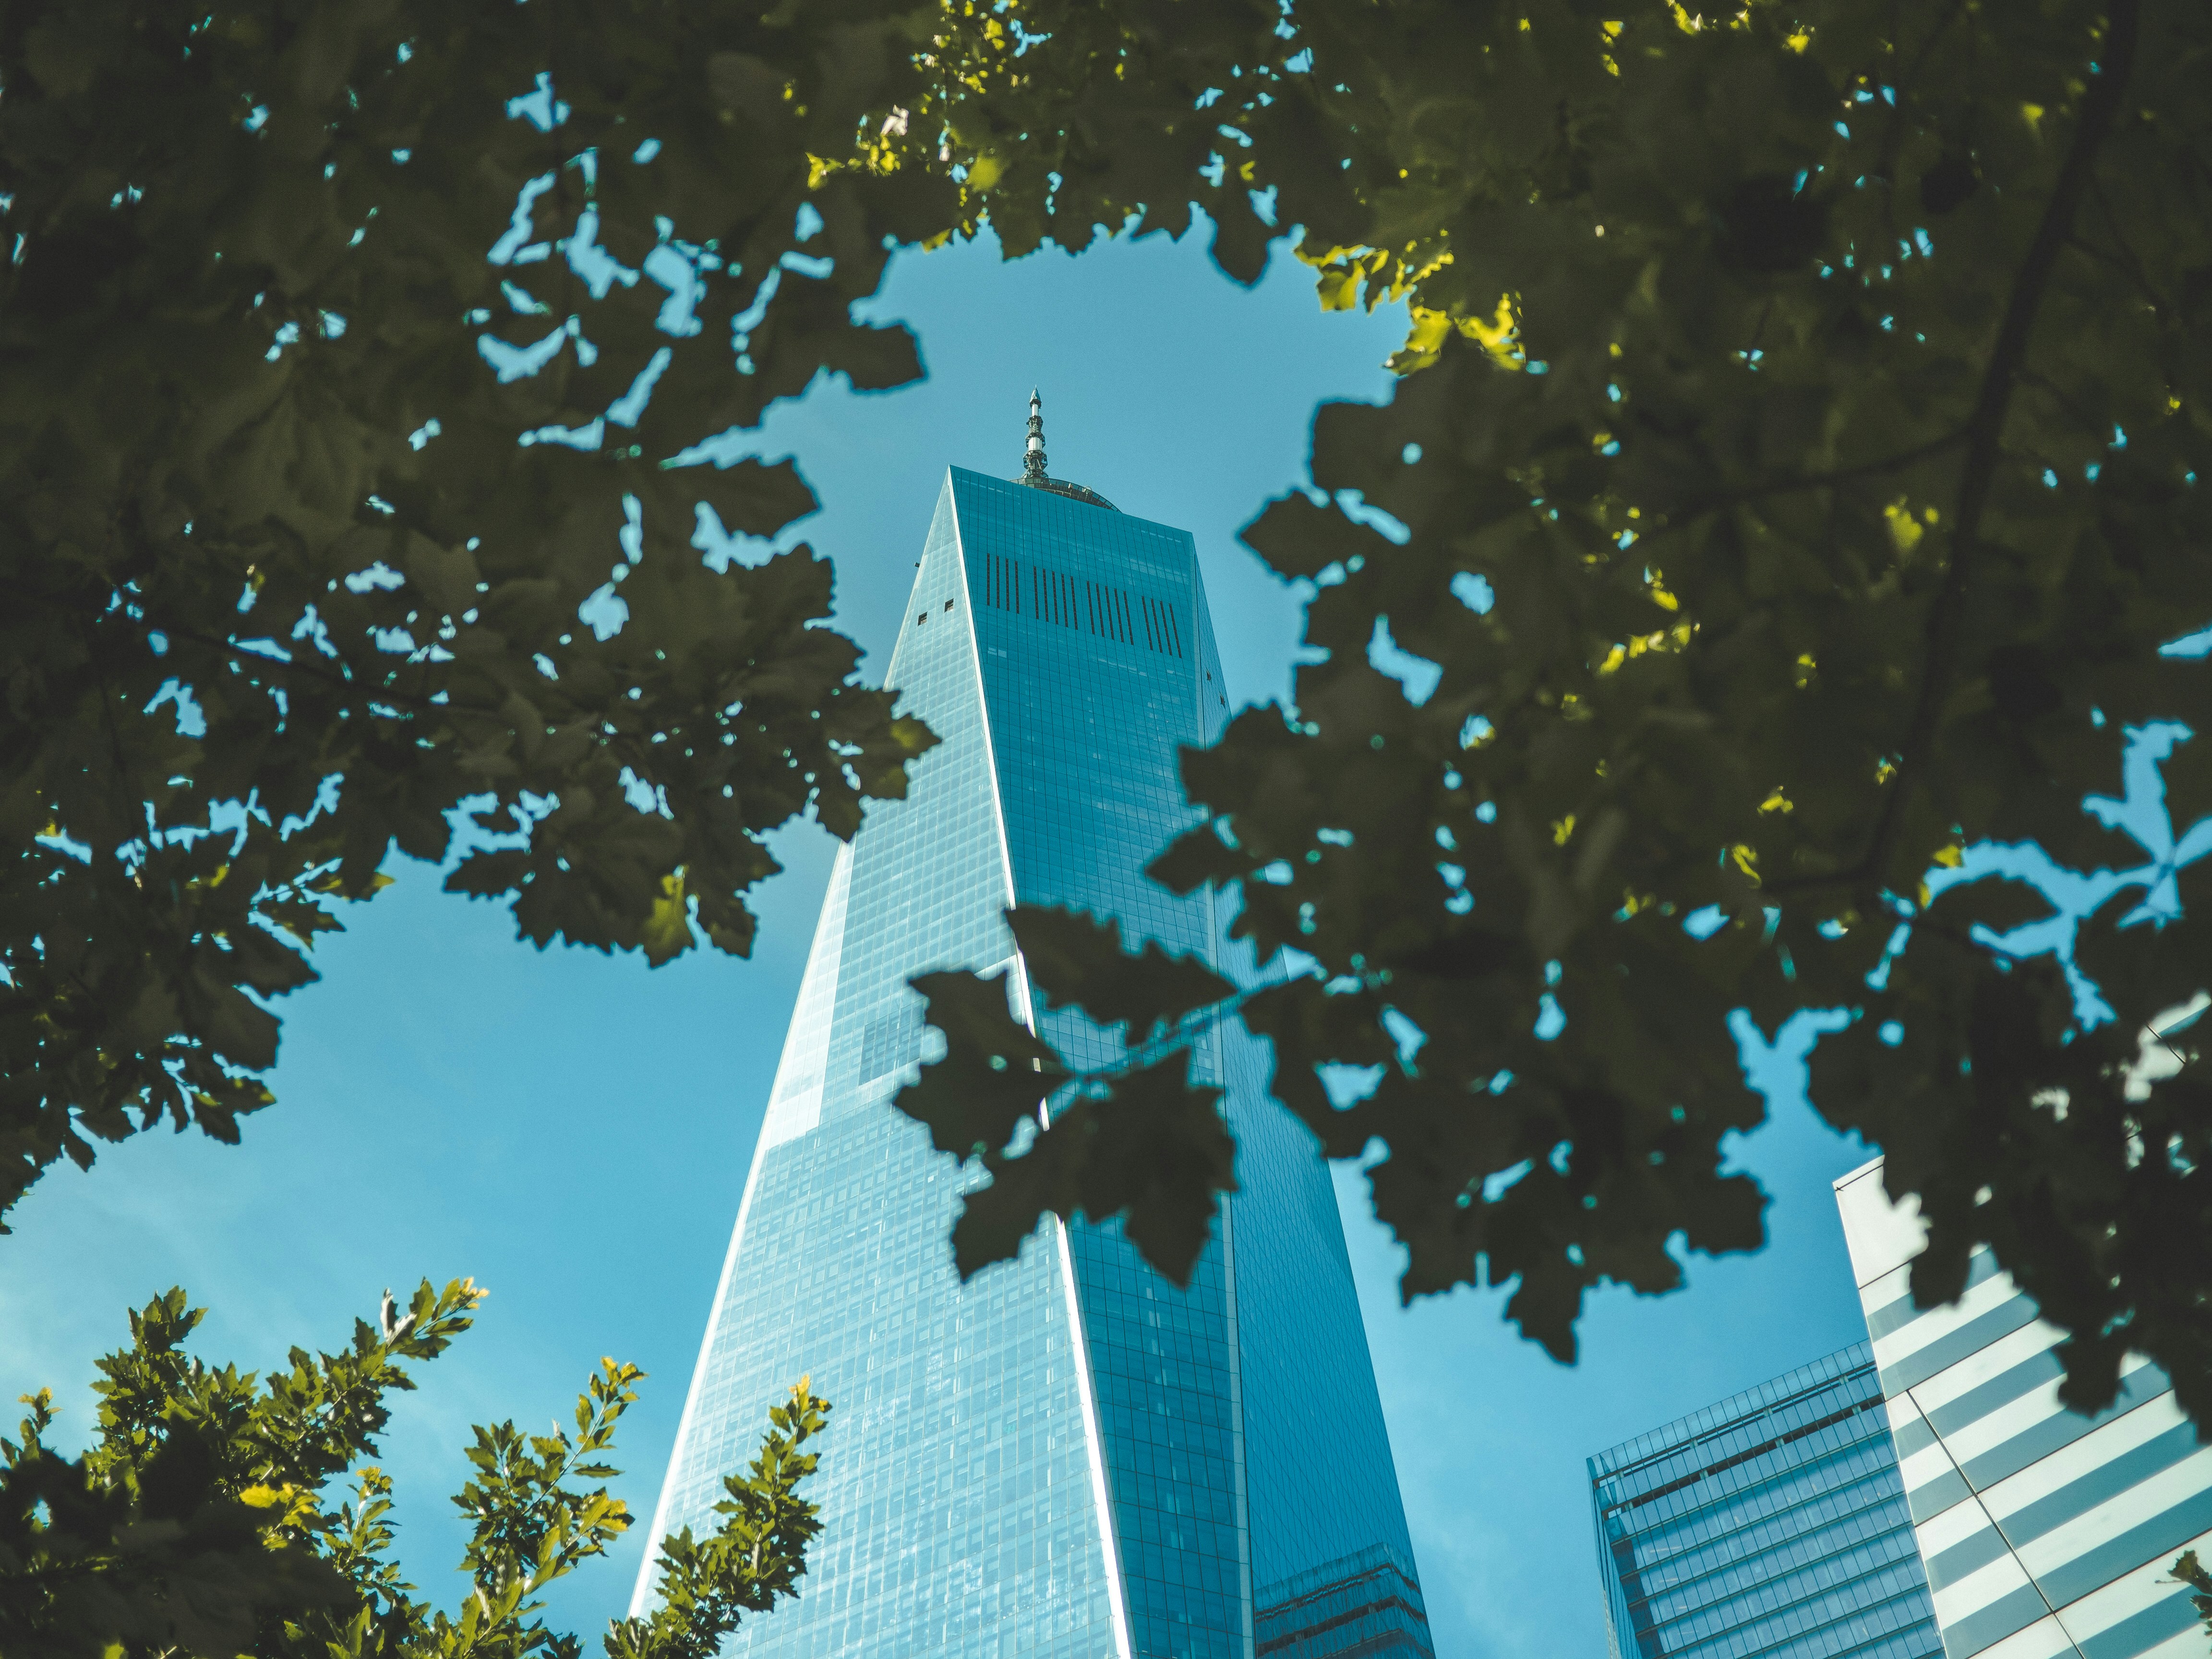 Looked up and saw the one World Trade Center through these trees and thought it looked awesome!